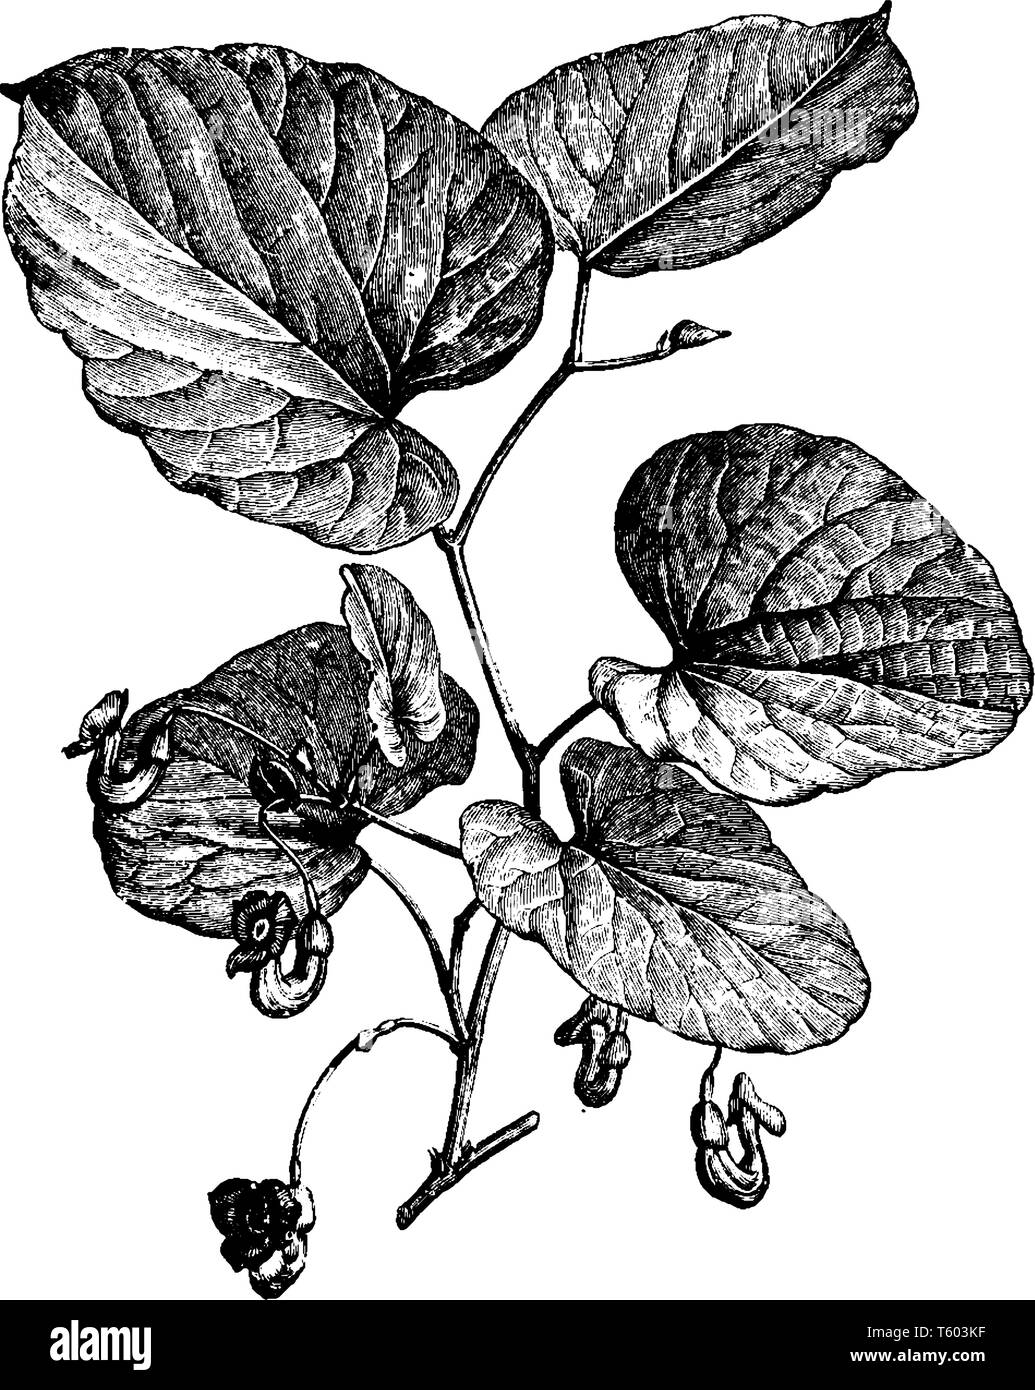 Picture shows Flowering Branch of Aristolochia Sipho Plant. Leaves are flat and have fine lines over there. It is commonly known as Birthwort or shrub Stock Vector